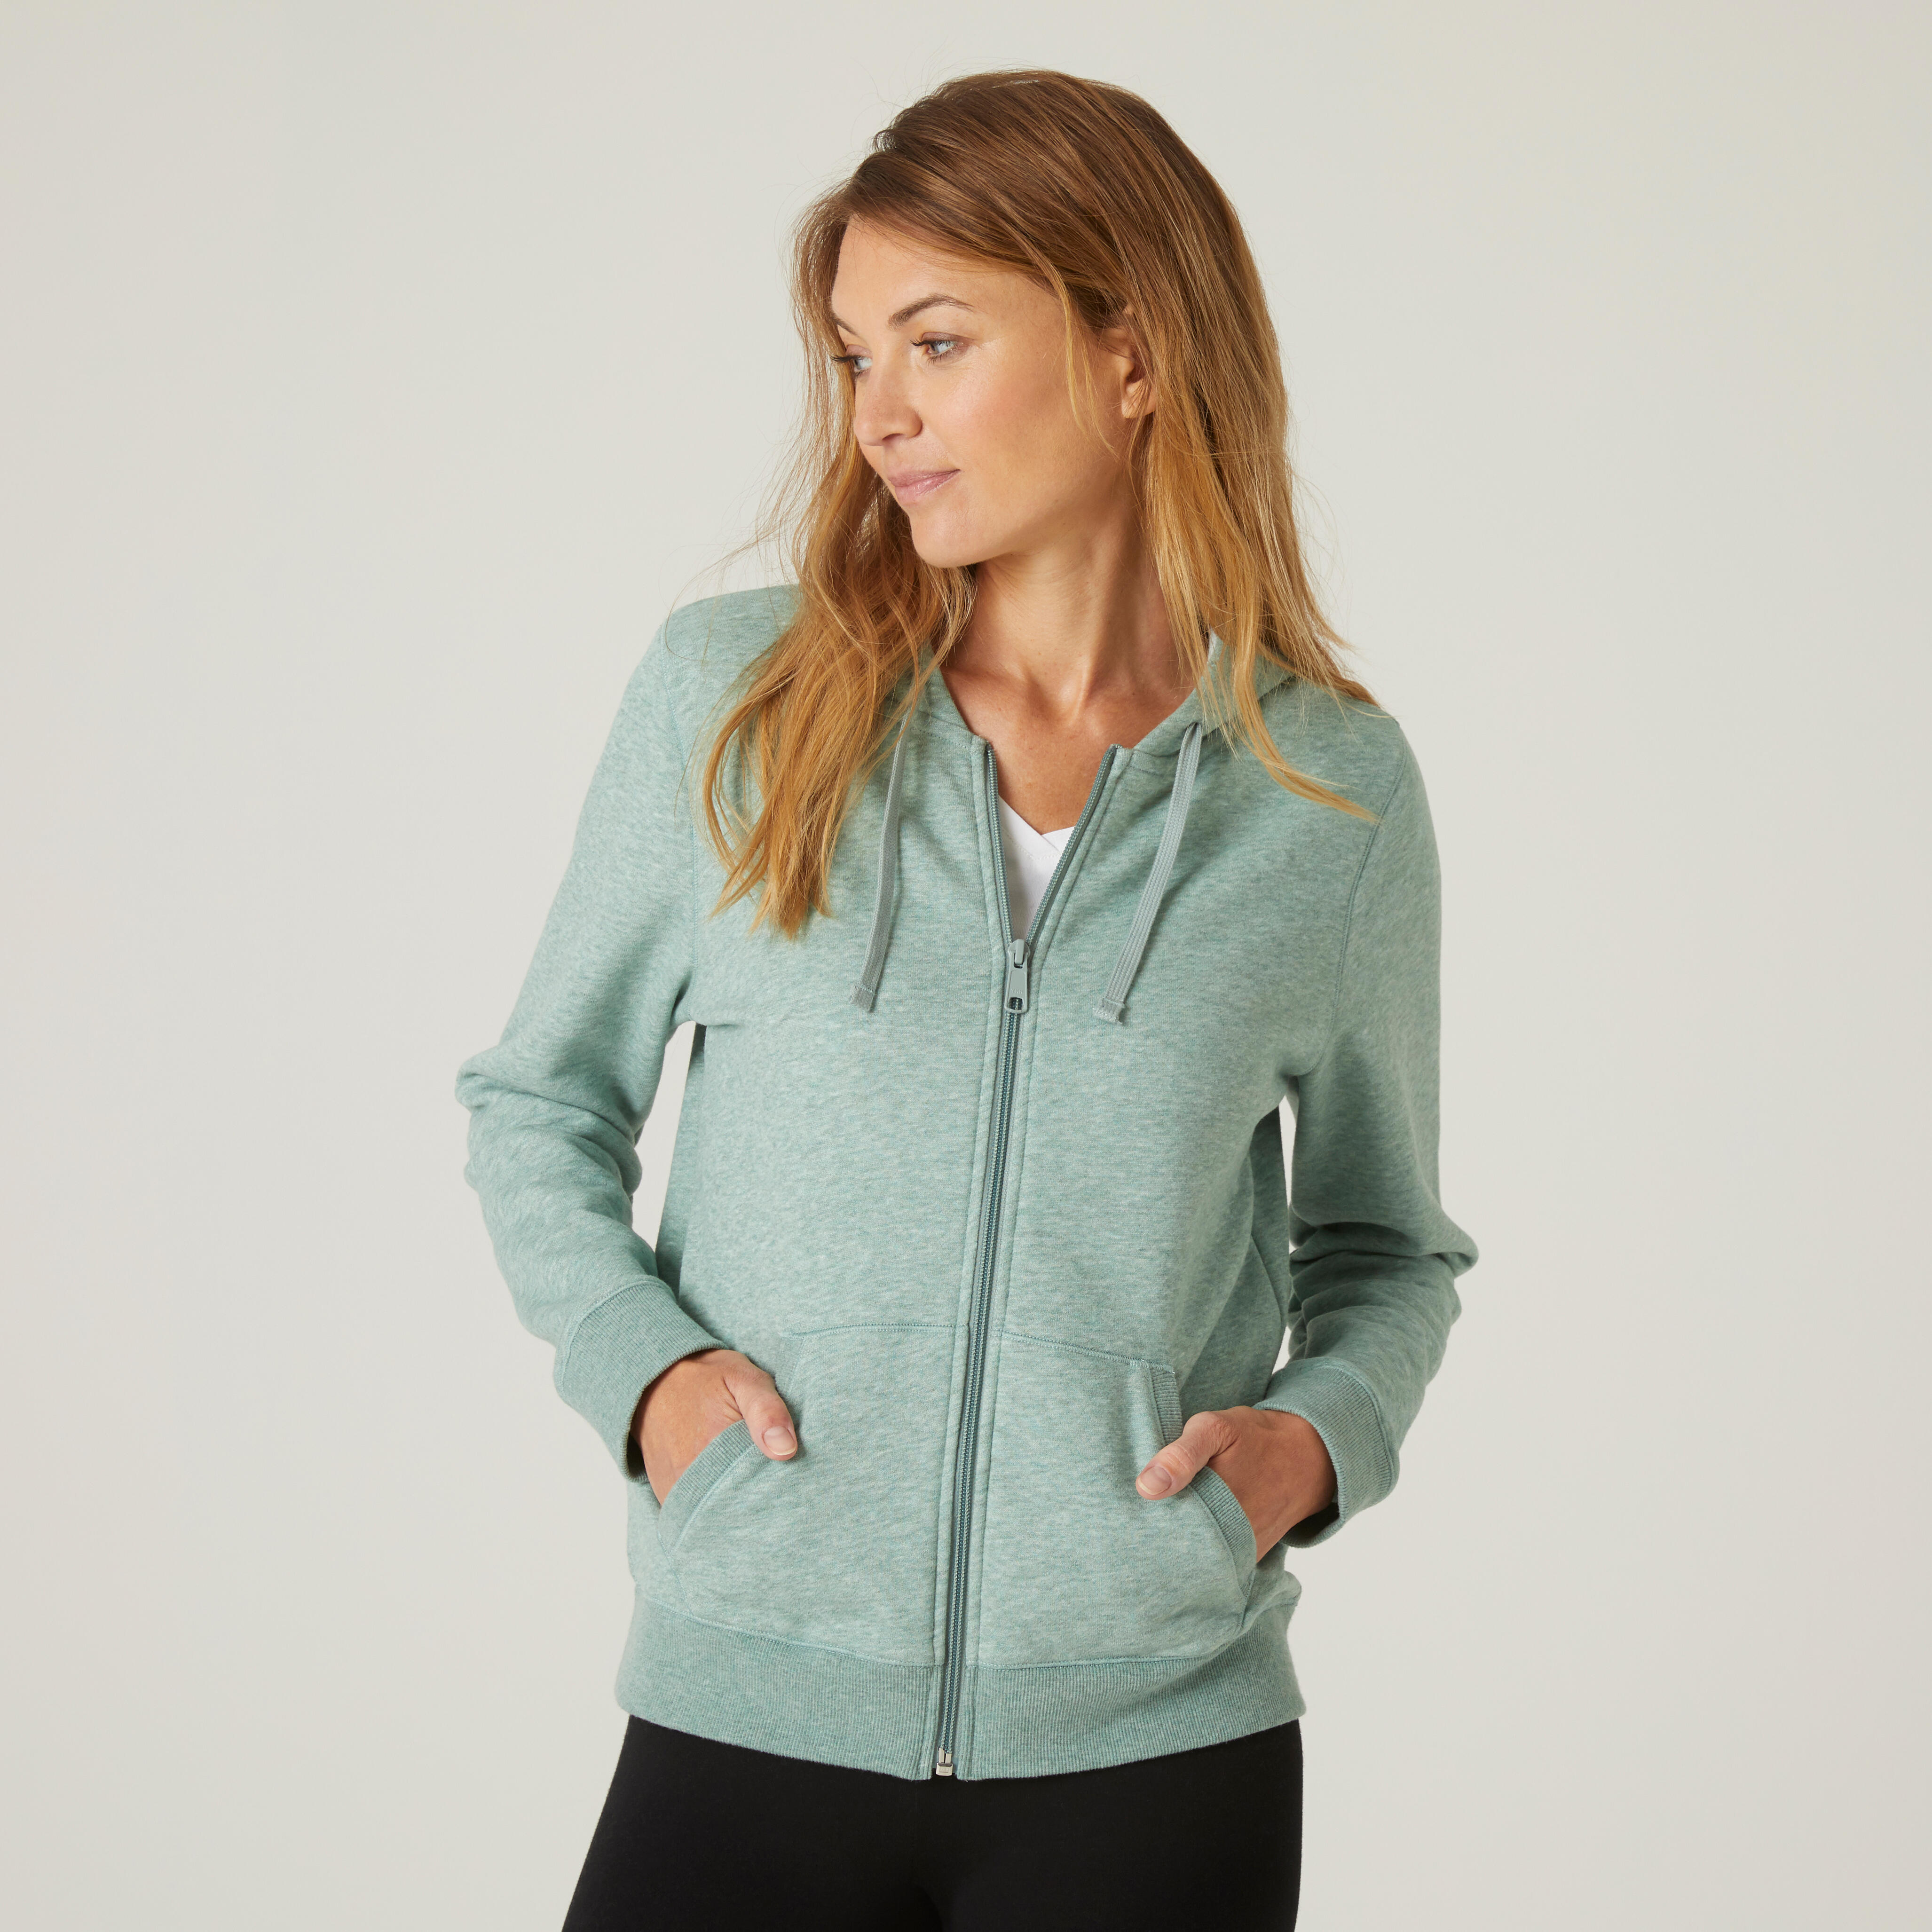 Own Earthy Springtime Looks With Lady White Co.'s Zip Latest Sweat Jackets